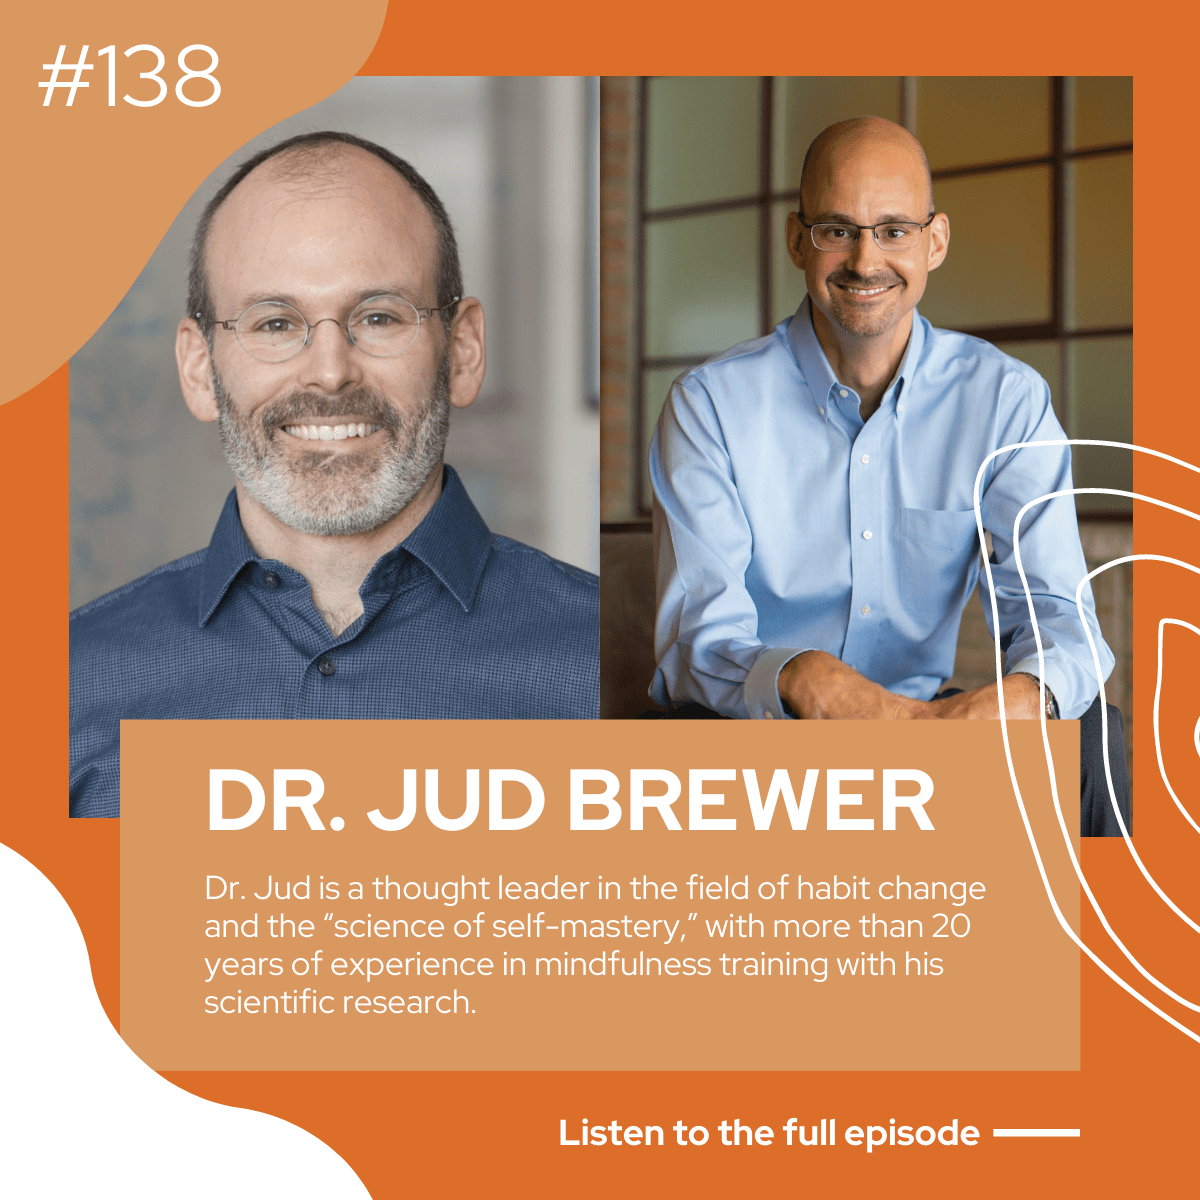 Dr. Jud Brewer and CJ McClanahan